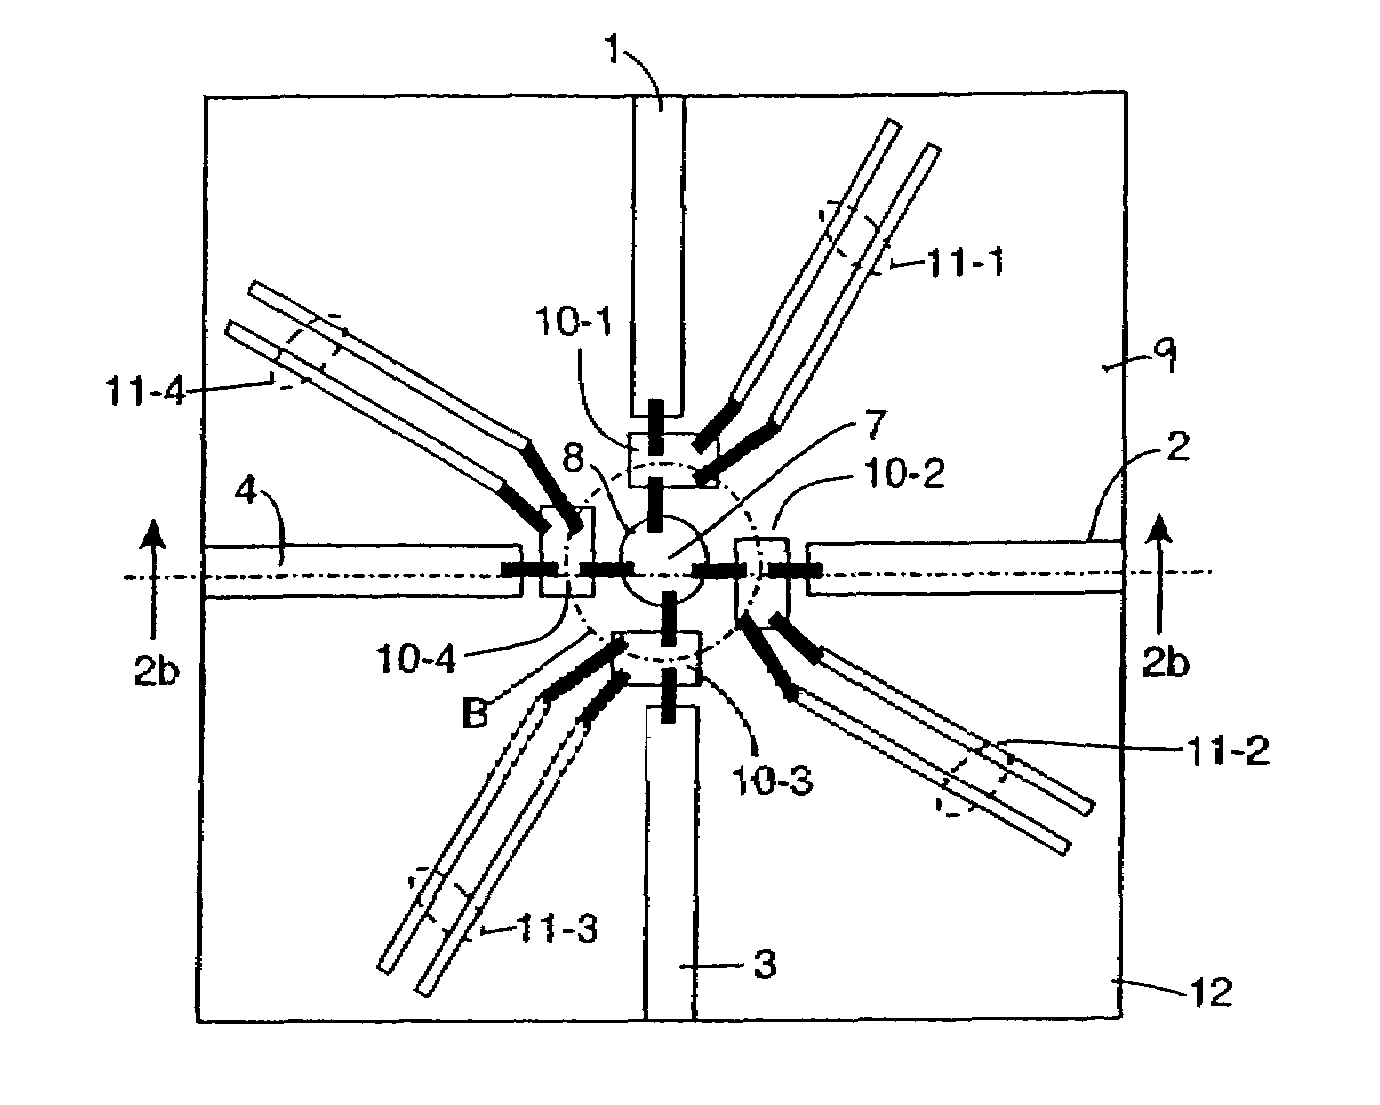 Single-pole multi-throw switch having low parasitic reactance, and an antenna incorporating the same